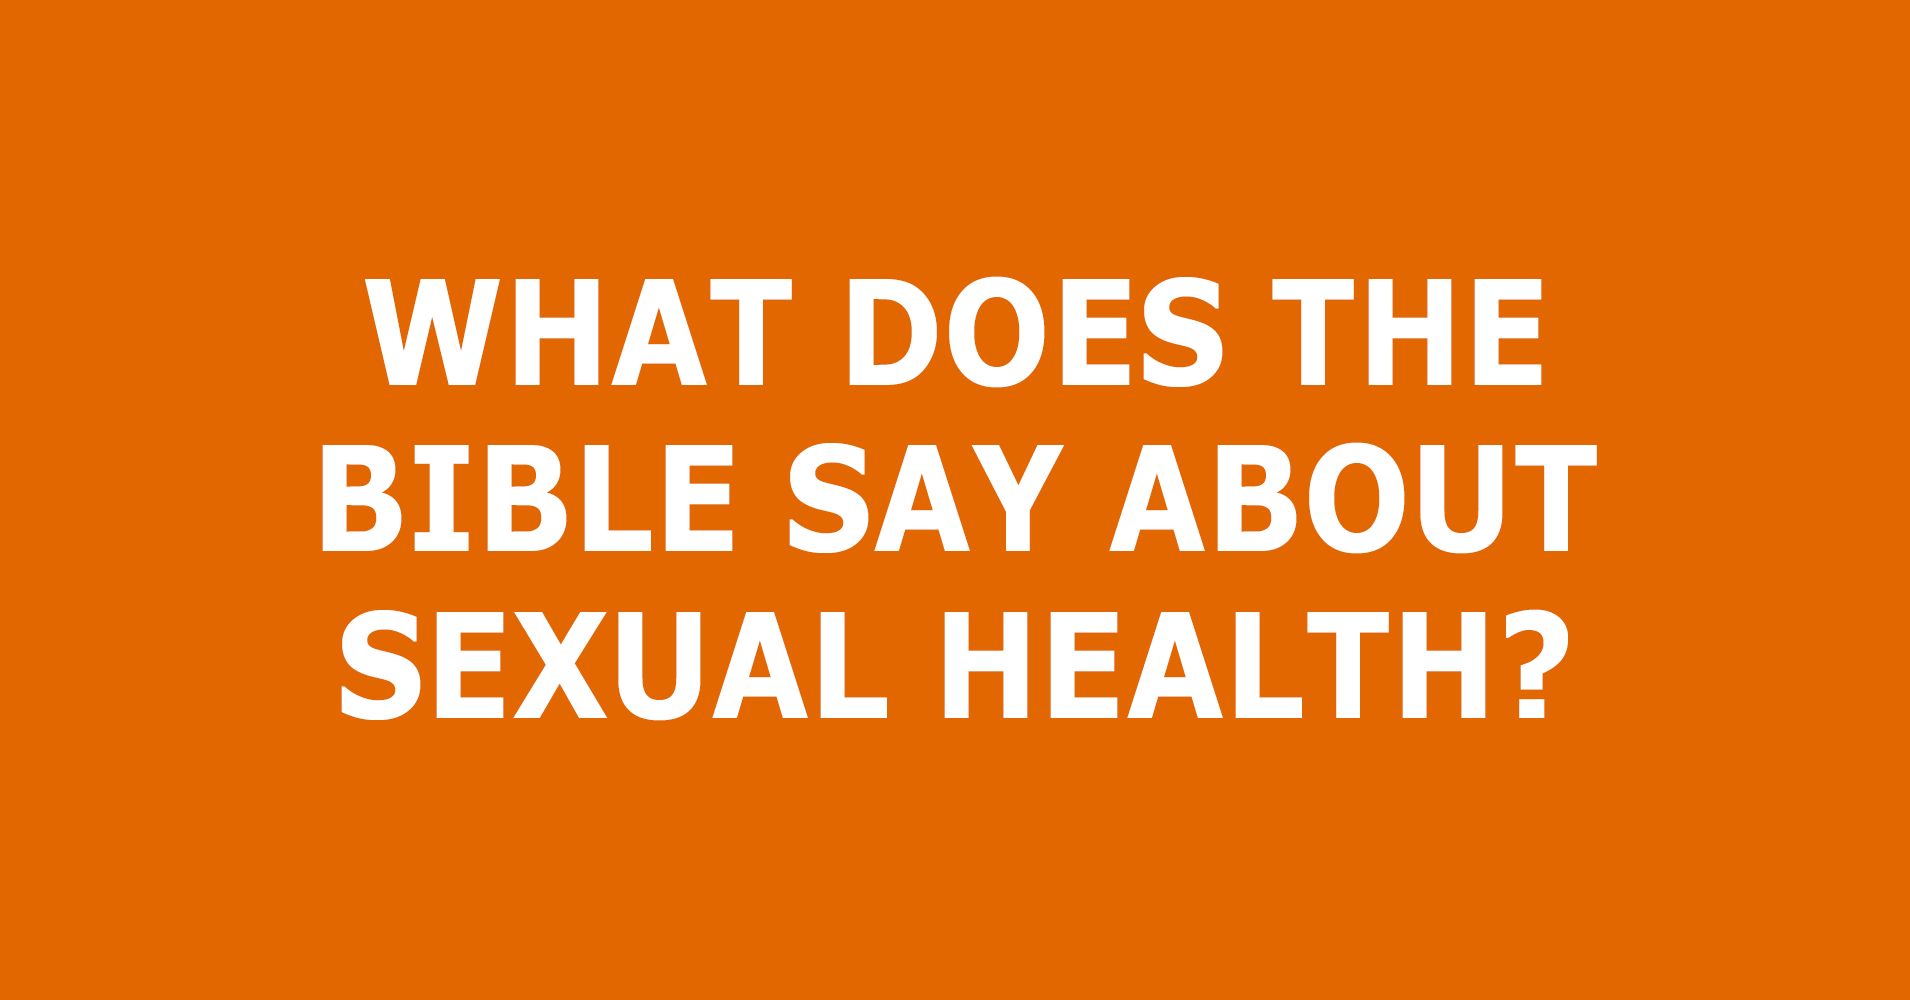 What Does the Bible Say about Sexual Health? — Trustworthy Word photo pic